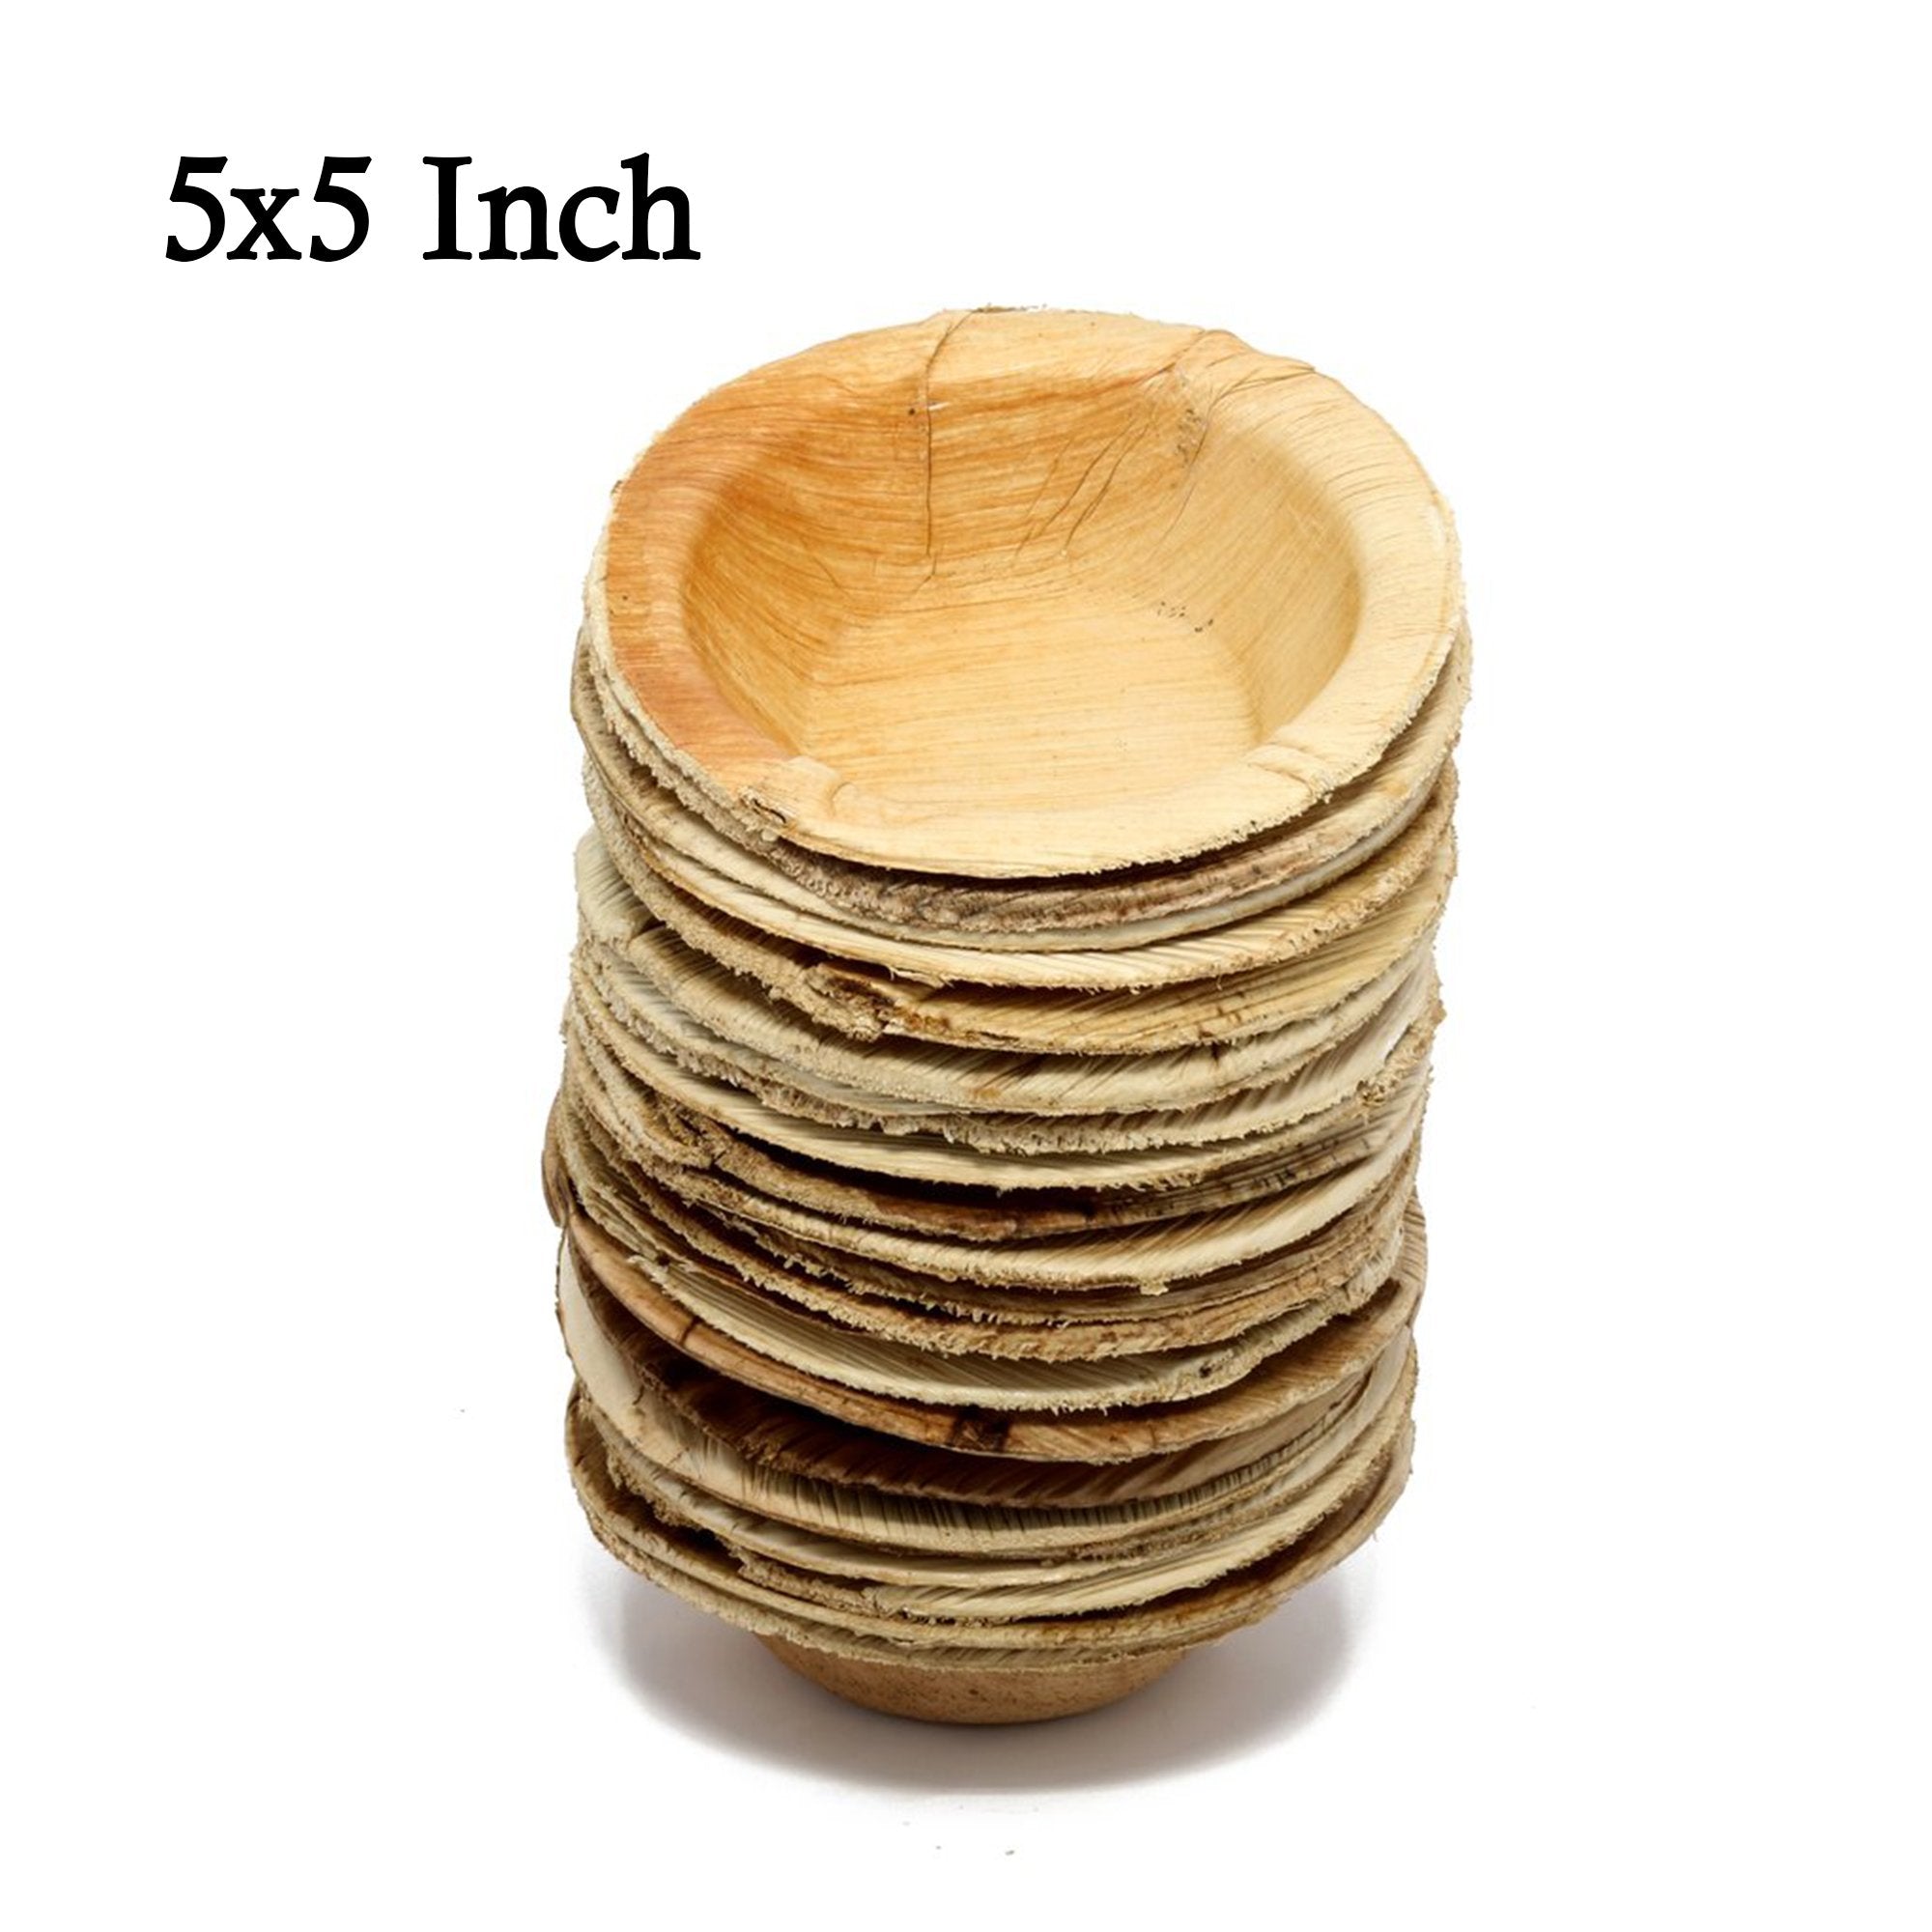 3213 Disposable Round Shape Eco-friendly Areca Palm Leaf Bowl (5x5 inch) (pack of 25) - SkyShopy